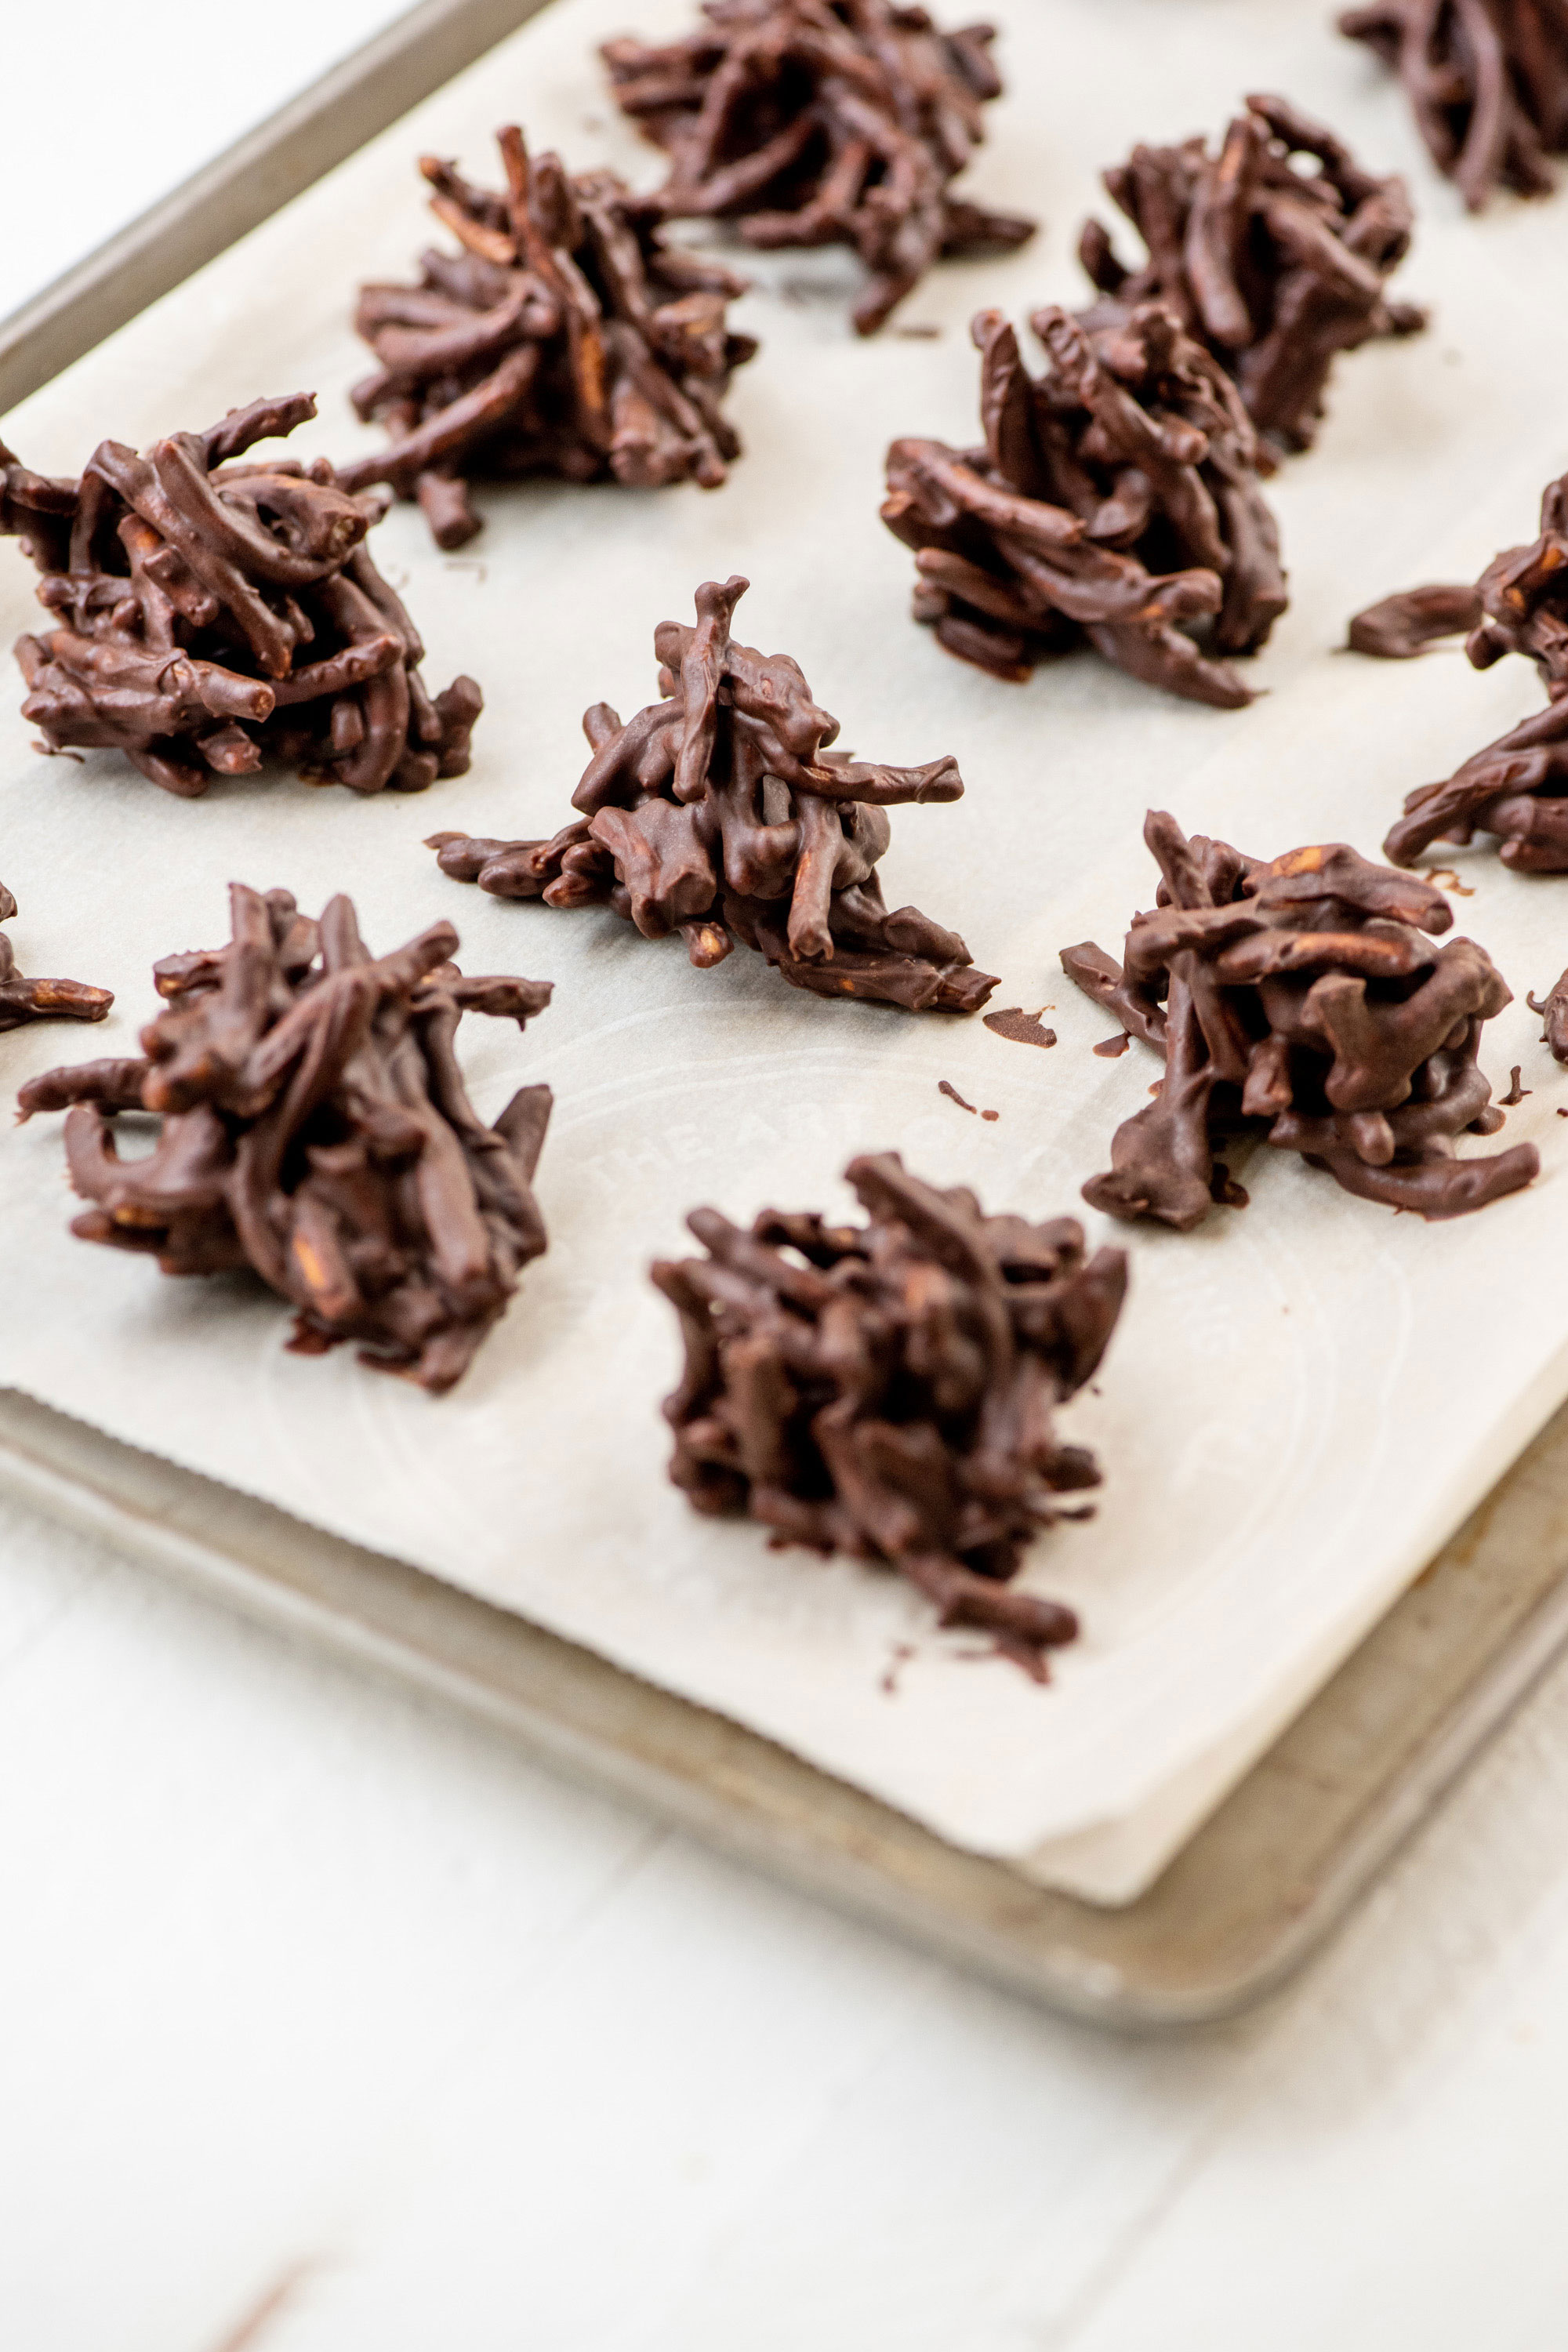 Chocolate, Peanut and Pretzel No-Bake Haystack Cookies on a lined baking sheet.